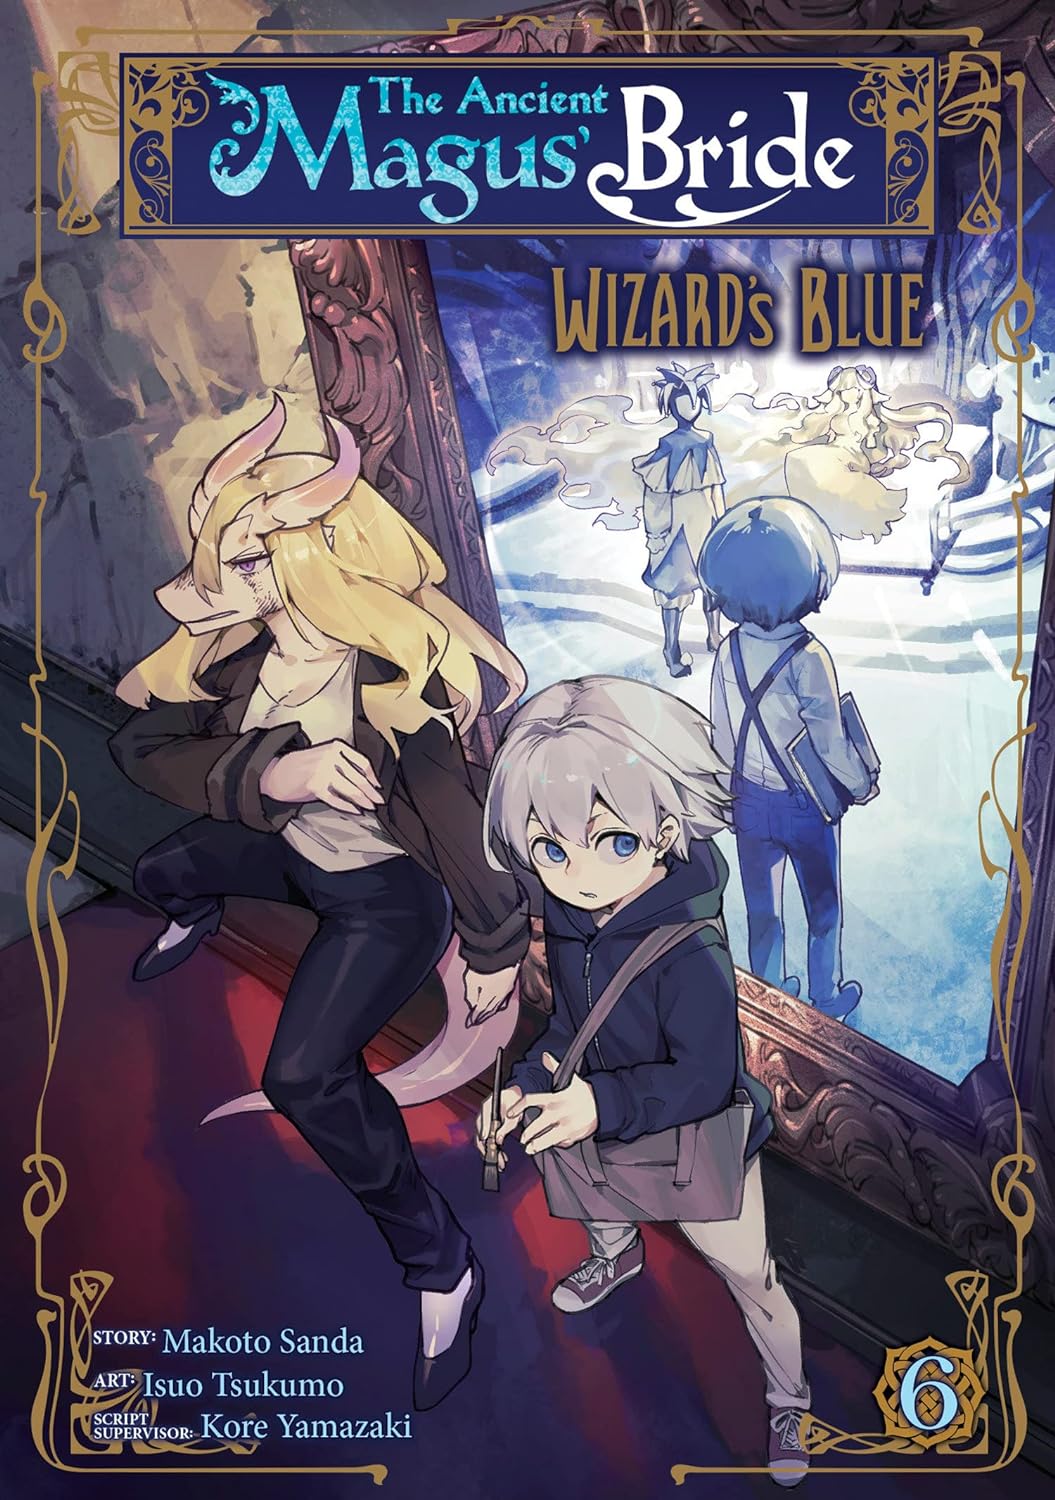 The Ancient Magus' Bride: Wizard's Blue. Vol. 6